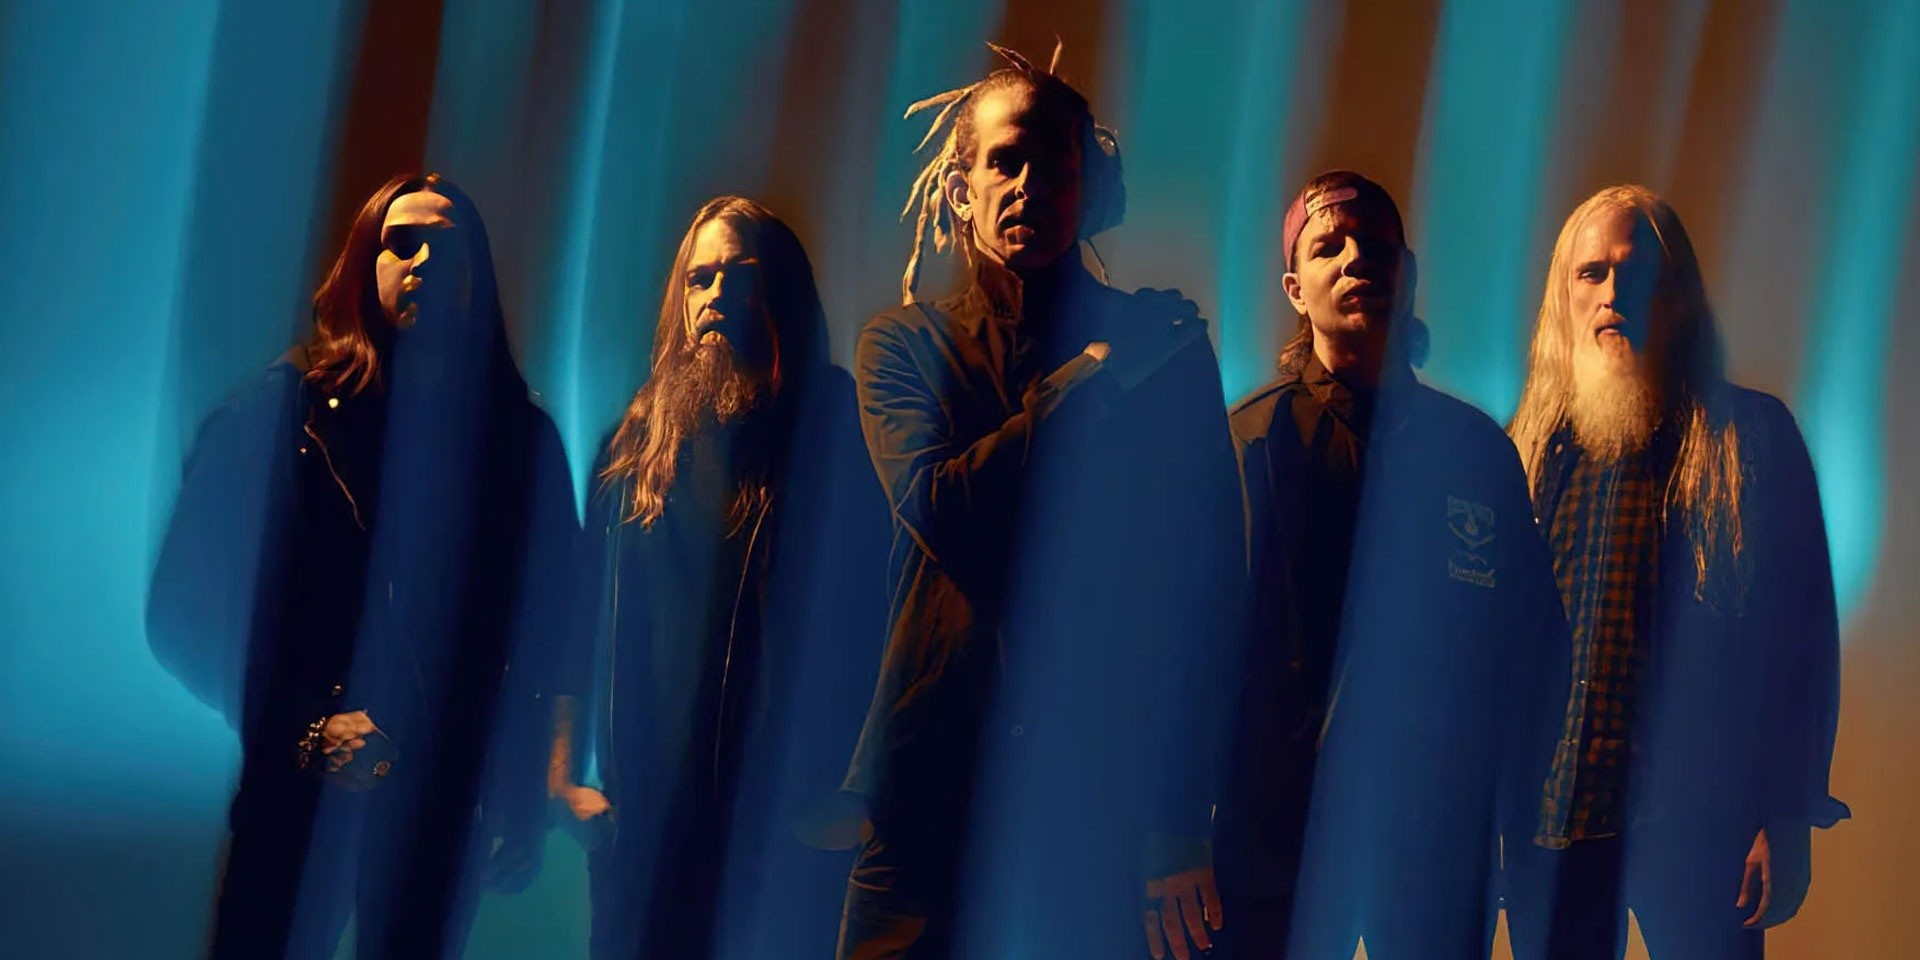 Lamb of God release new unrelenting single 'Nevermore' from upcoming album Omens – watch